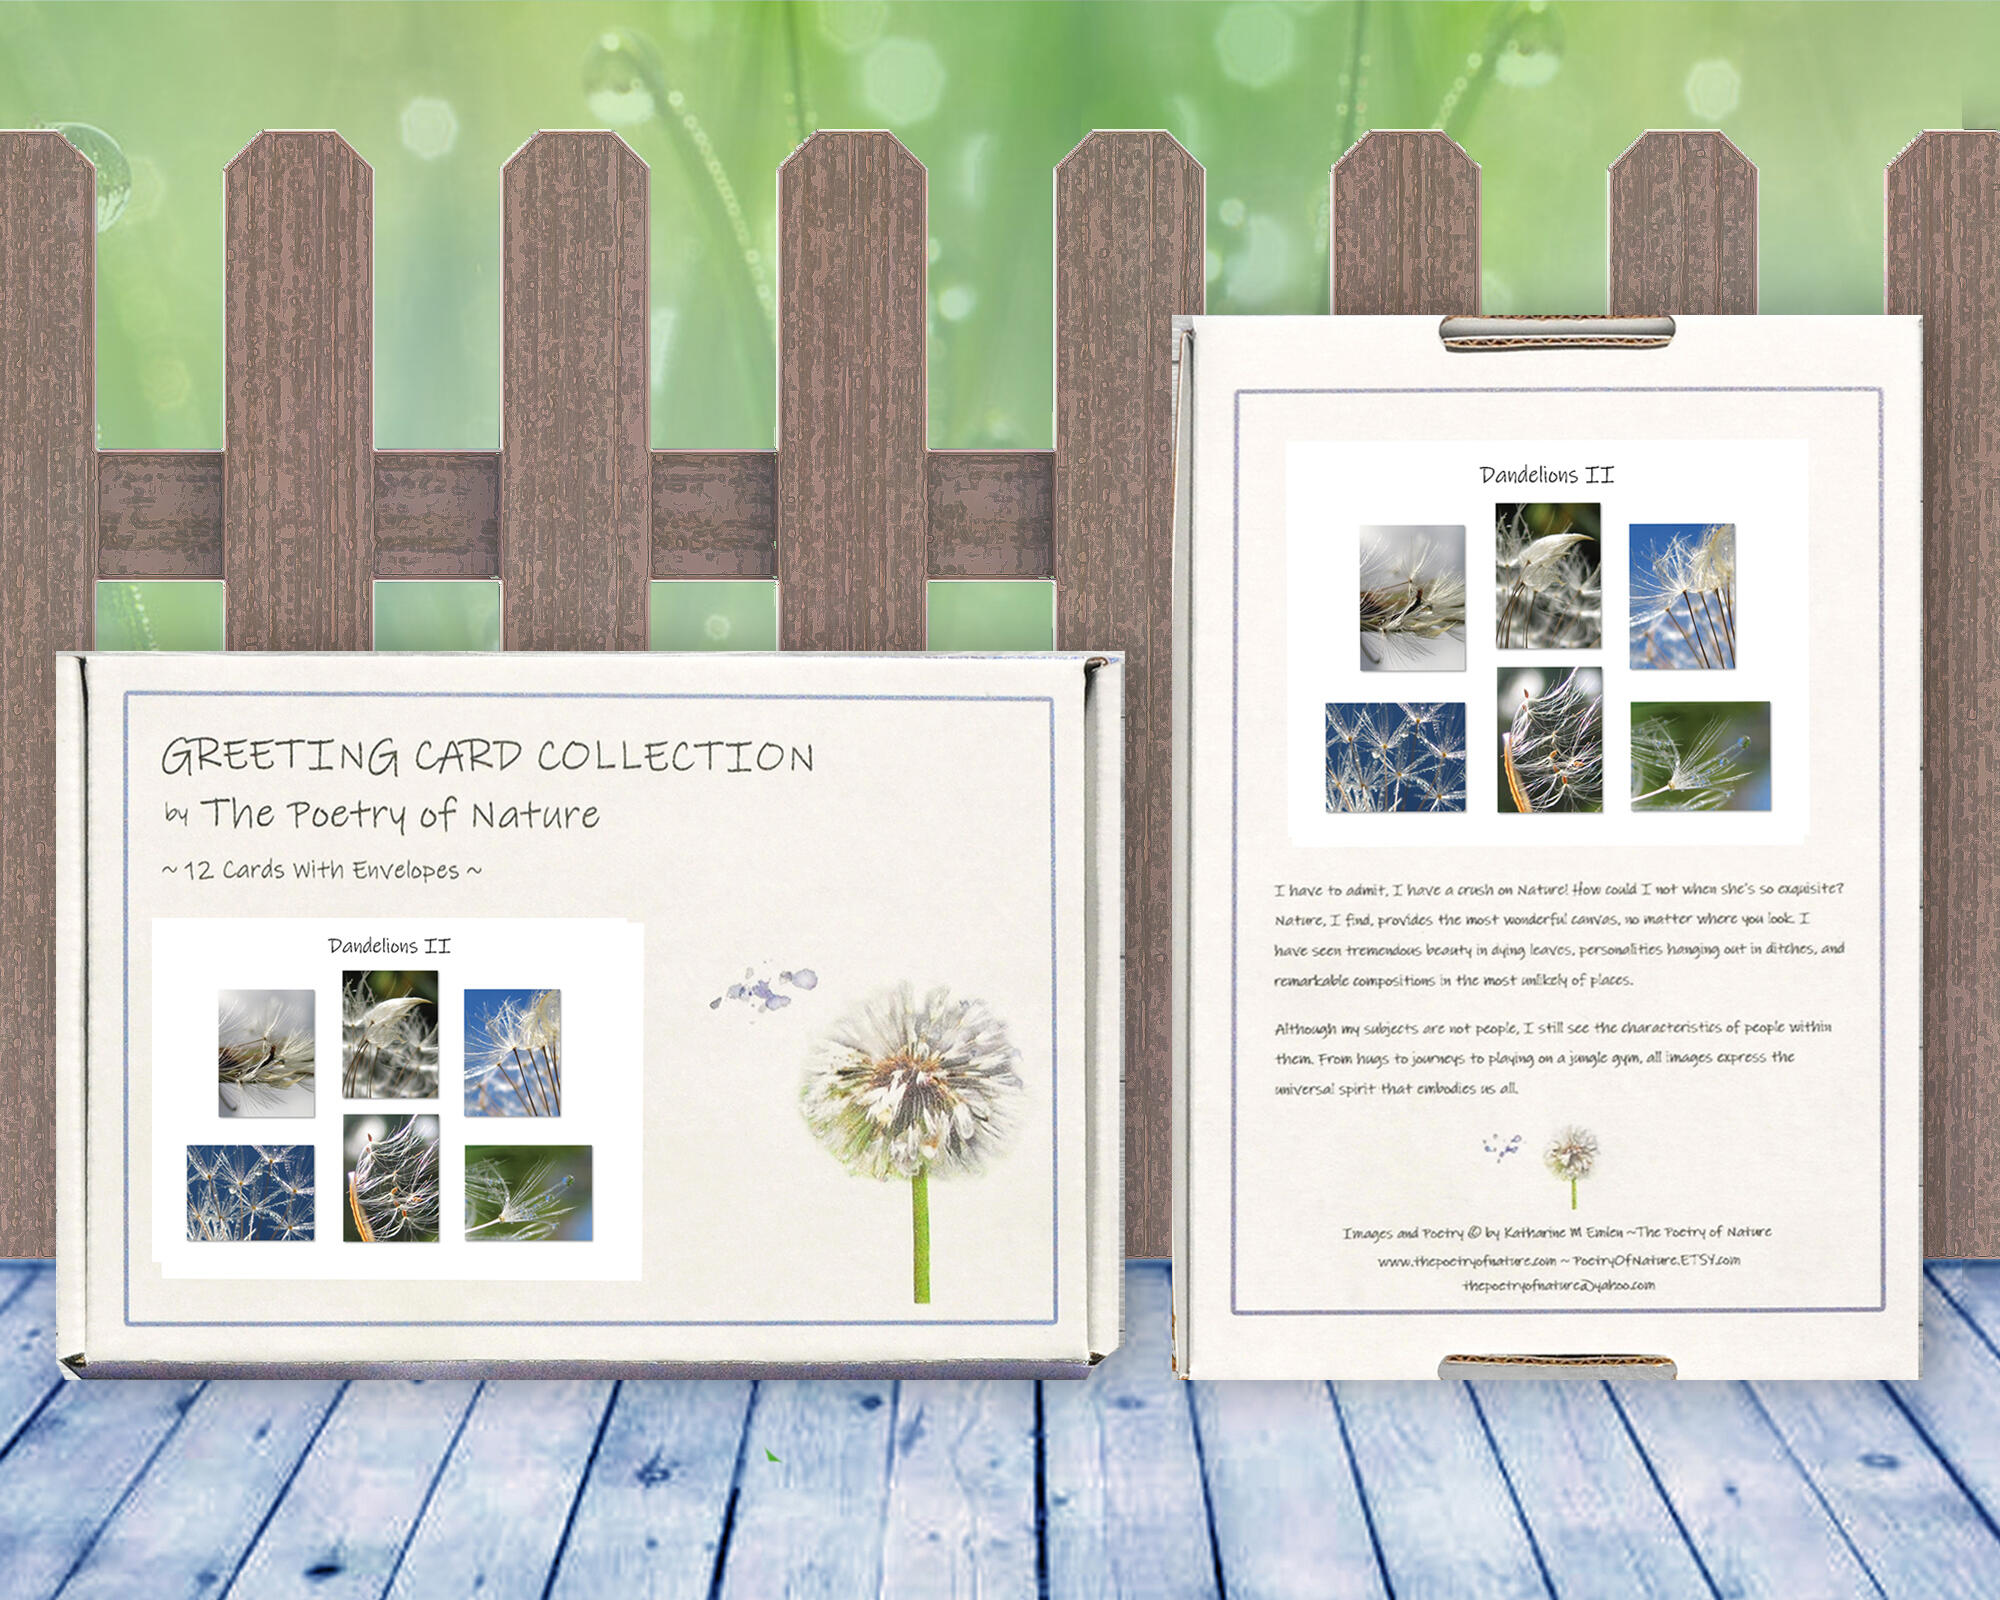 Dandelions II - Colorful, botanical, greeting card collection by The Poetry of Nature, Stories in nature photo cards with poems. Boxed Set Baker's Dozen